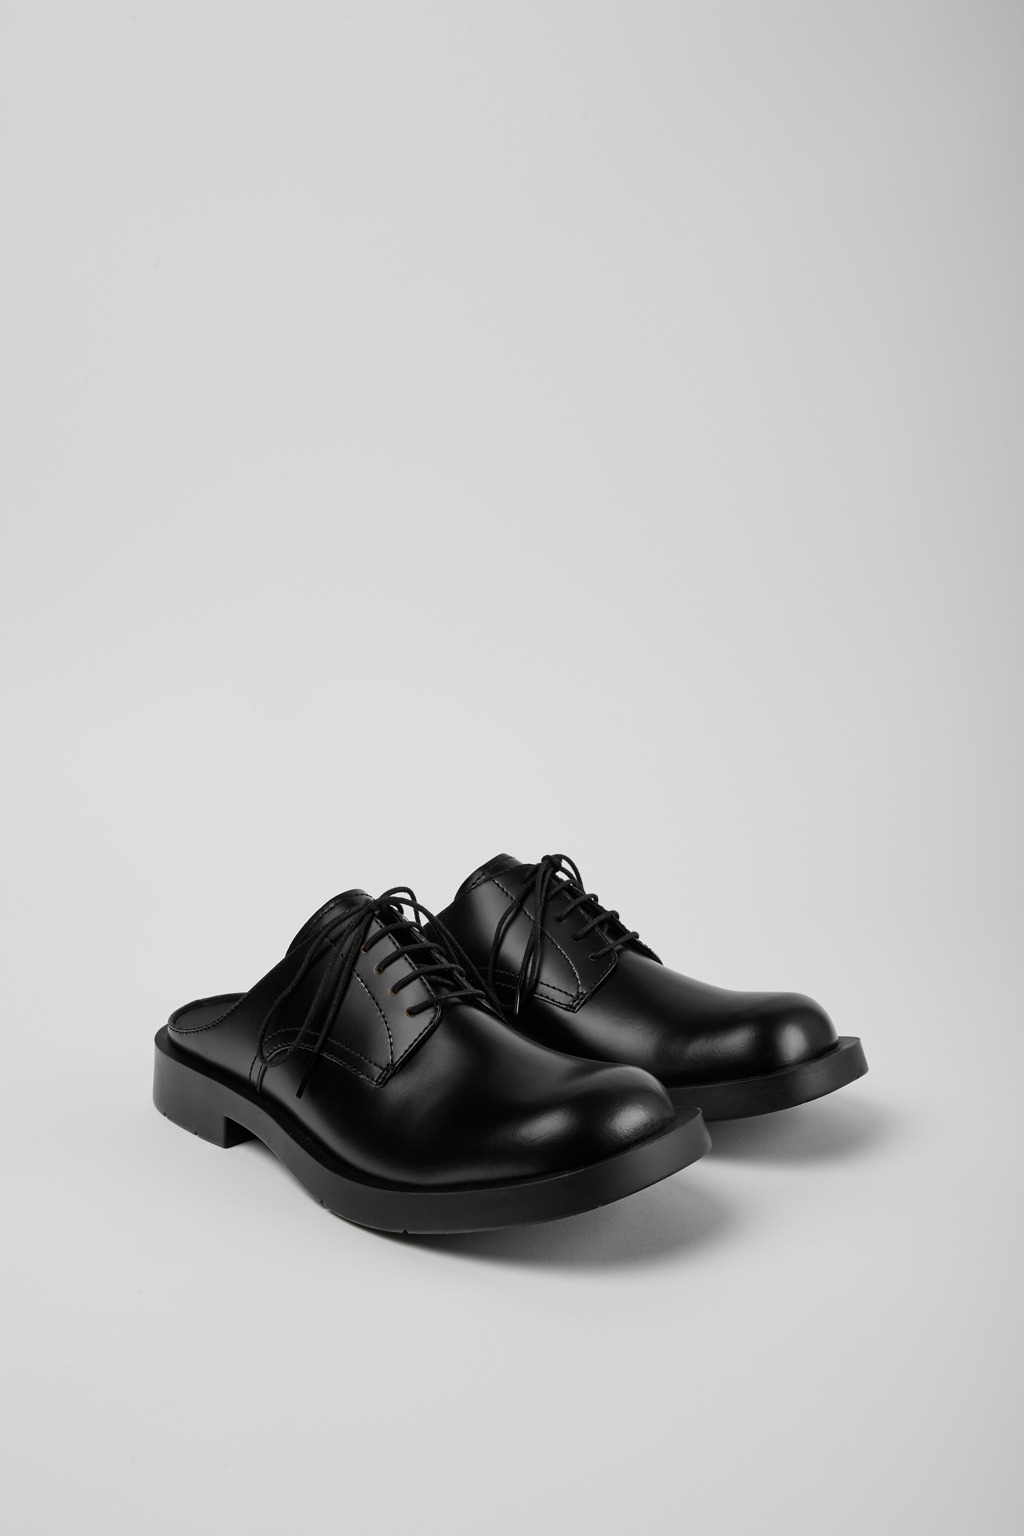 Neuman Black Formal Shoes for Unisex - Fall/Winter collection 